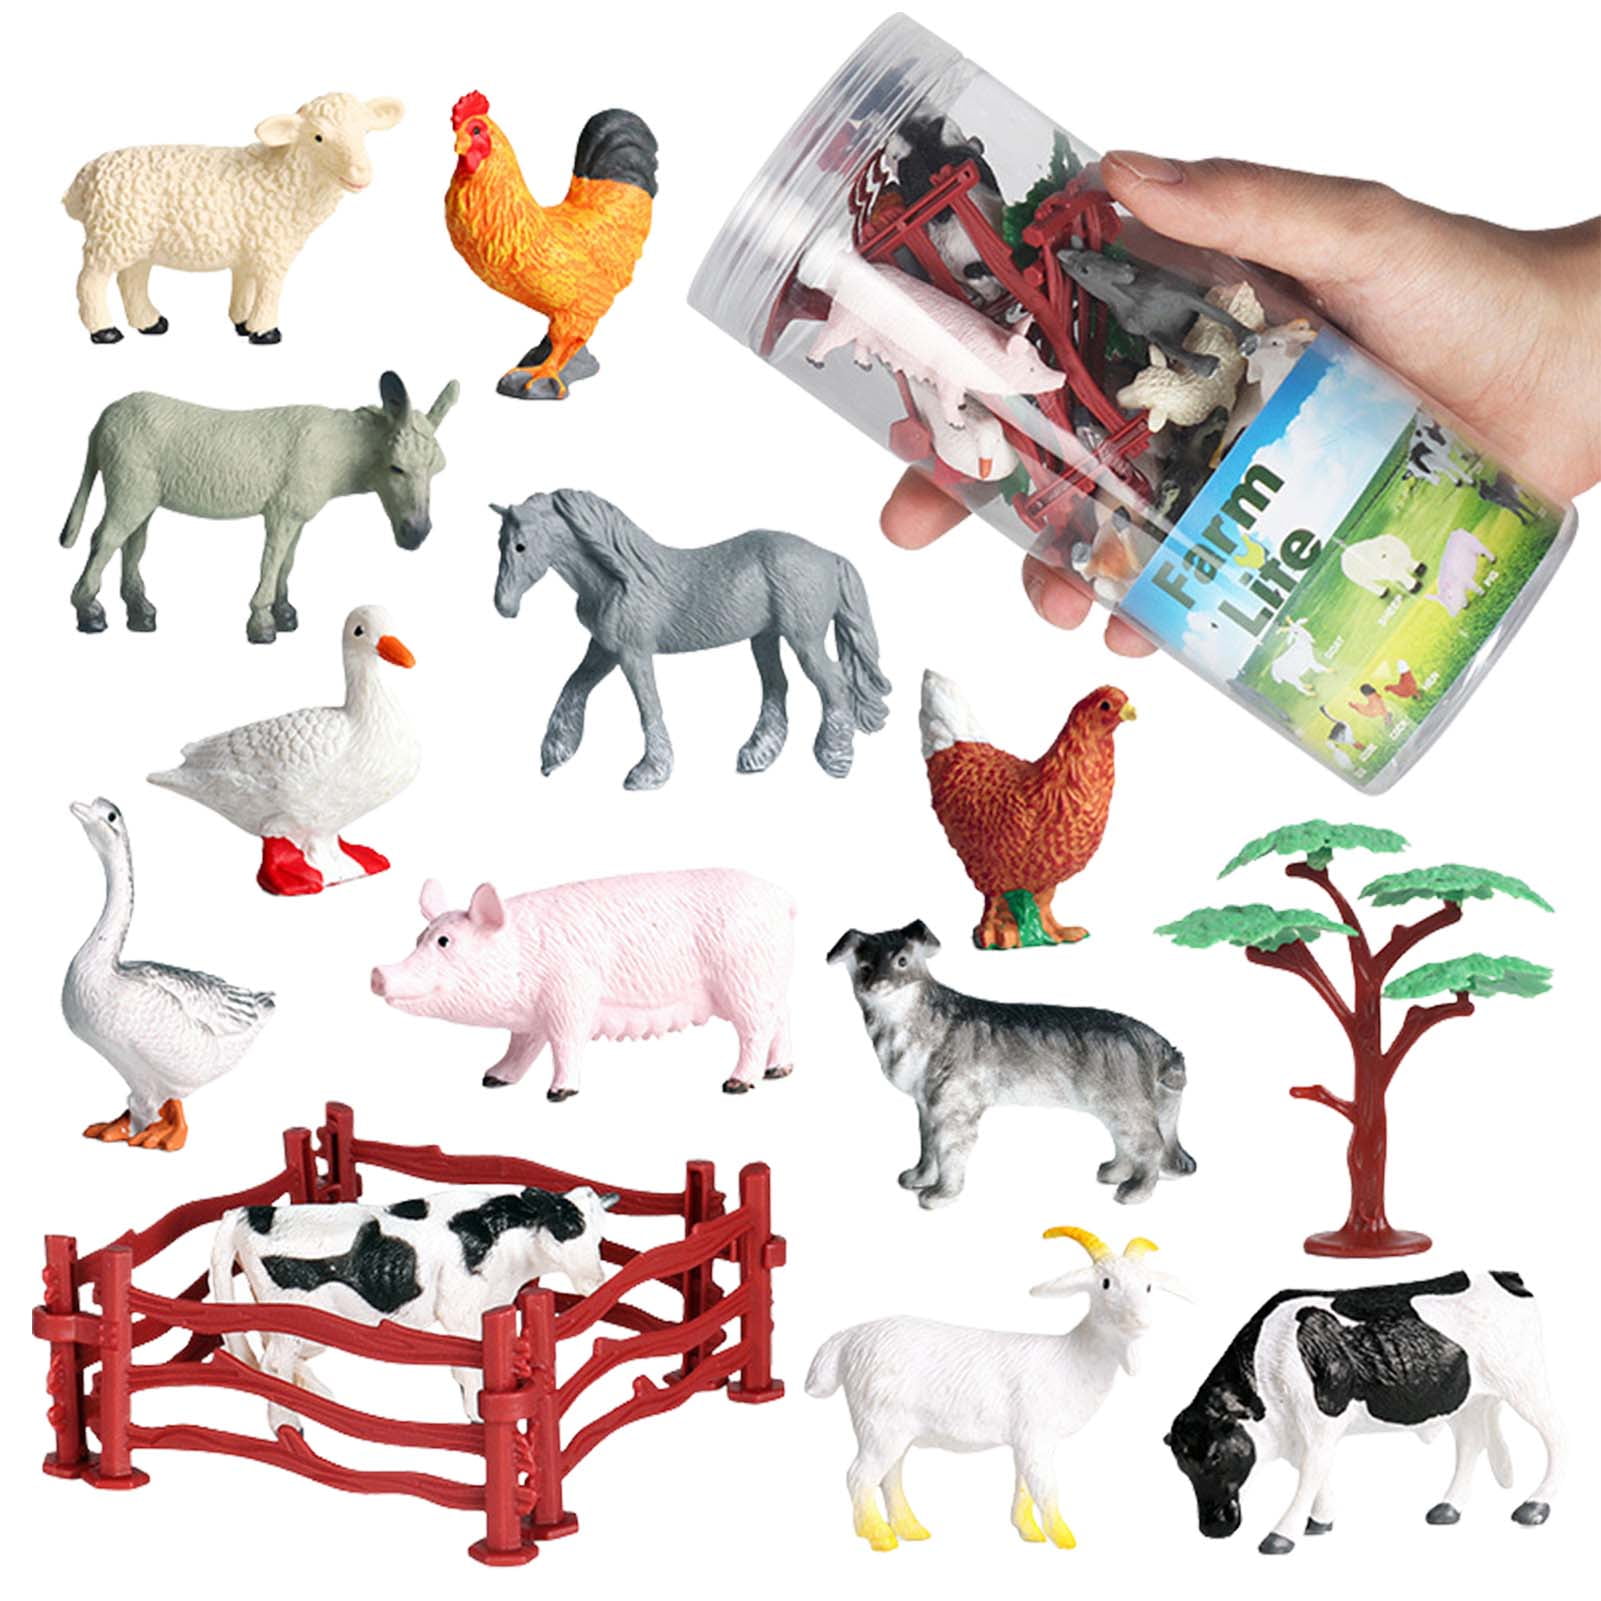 Wowspeed Farm Animals Figures Toy Set for Kids - 12Pcs Simulation Farm  Poultry Animal Model for Toddlers - Children Mini Animal Figures Set, Toy  Set Ornaments 